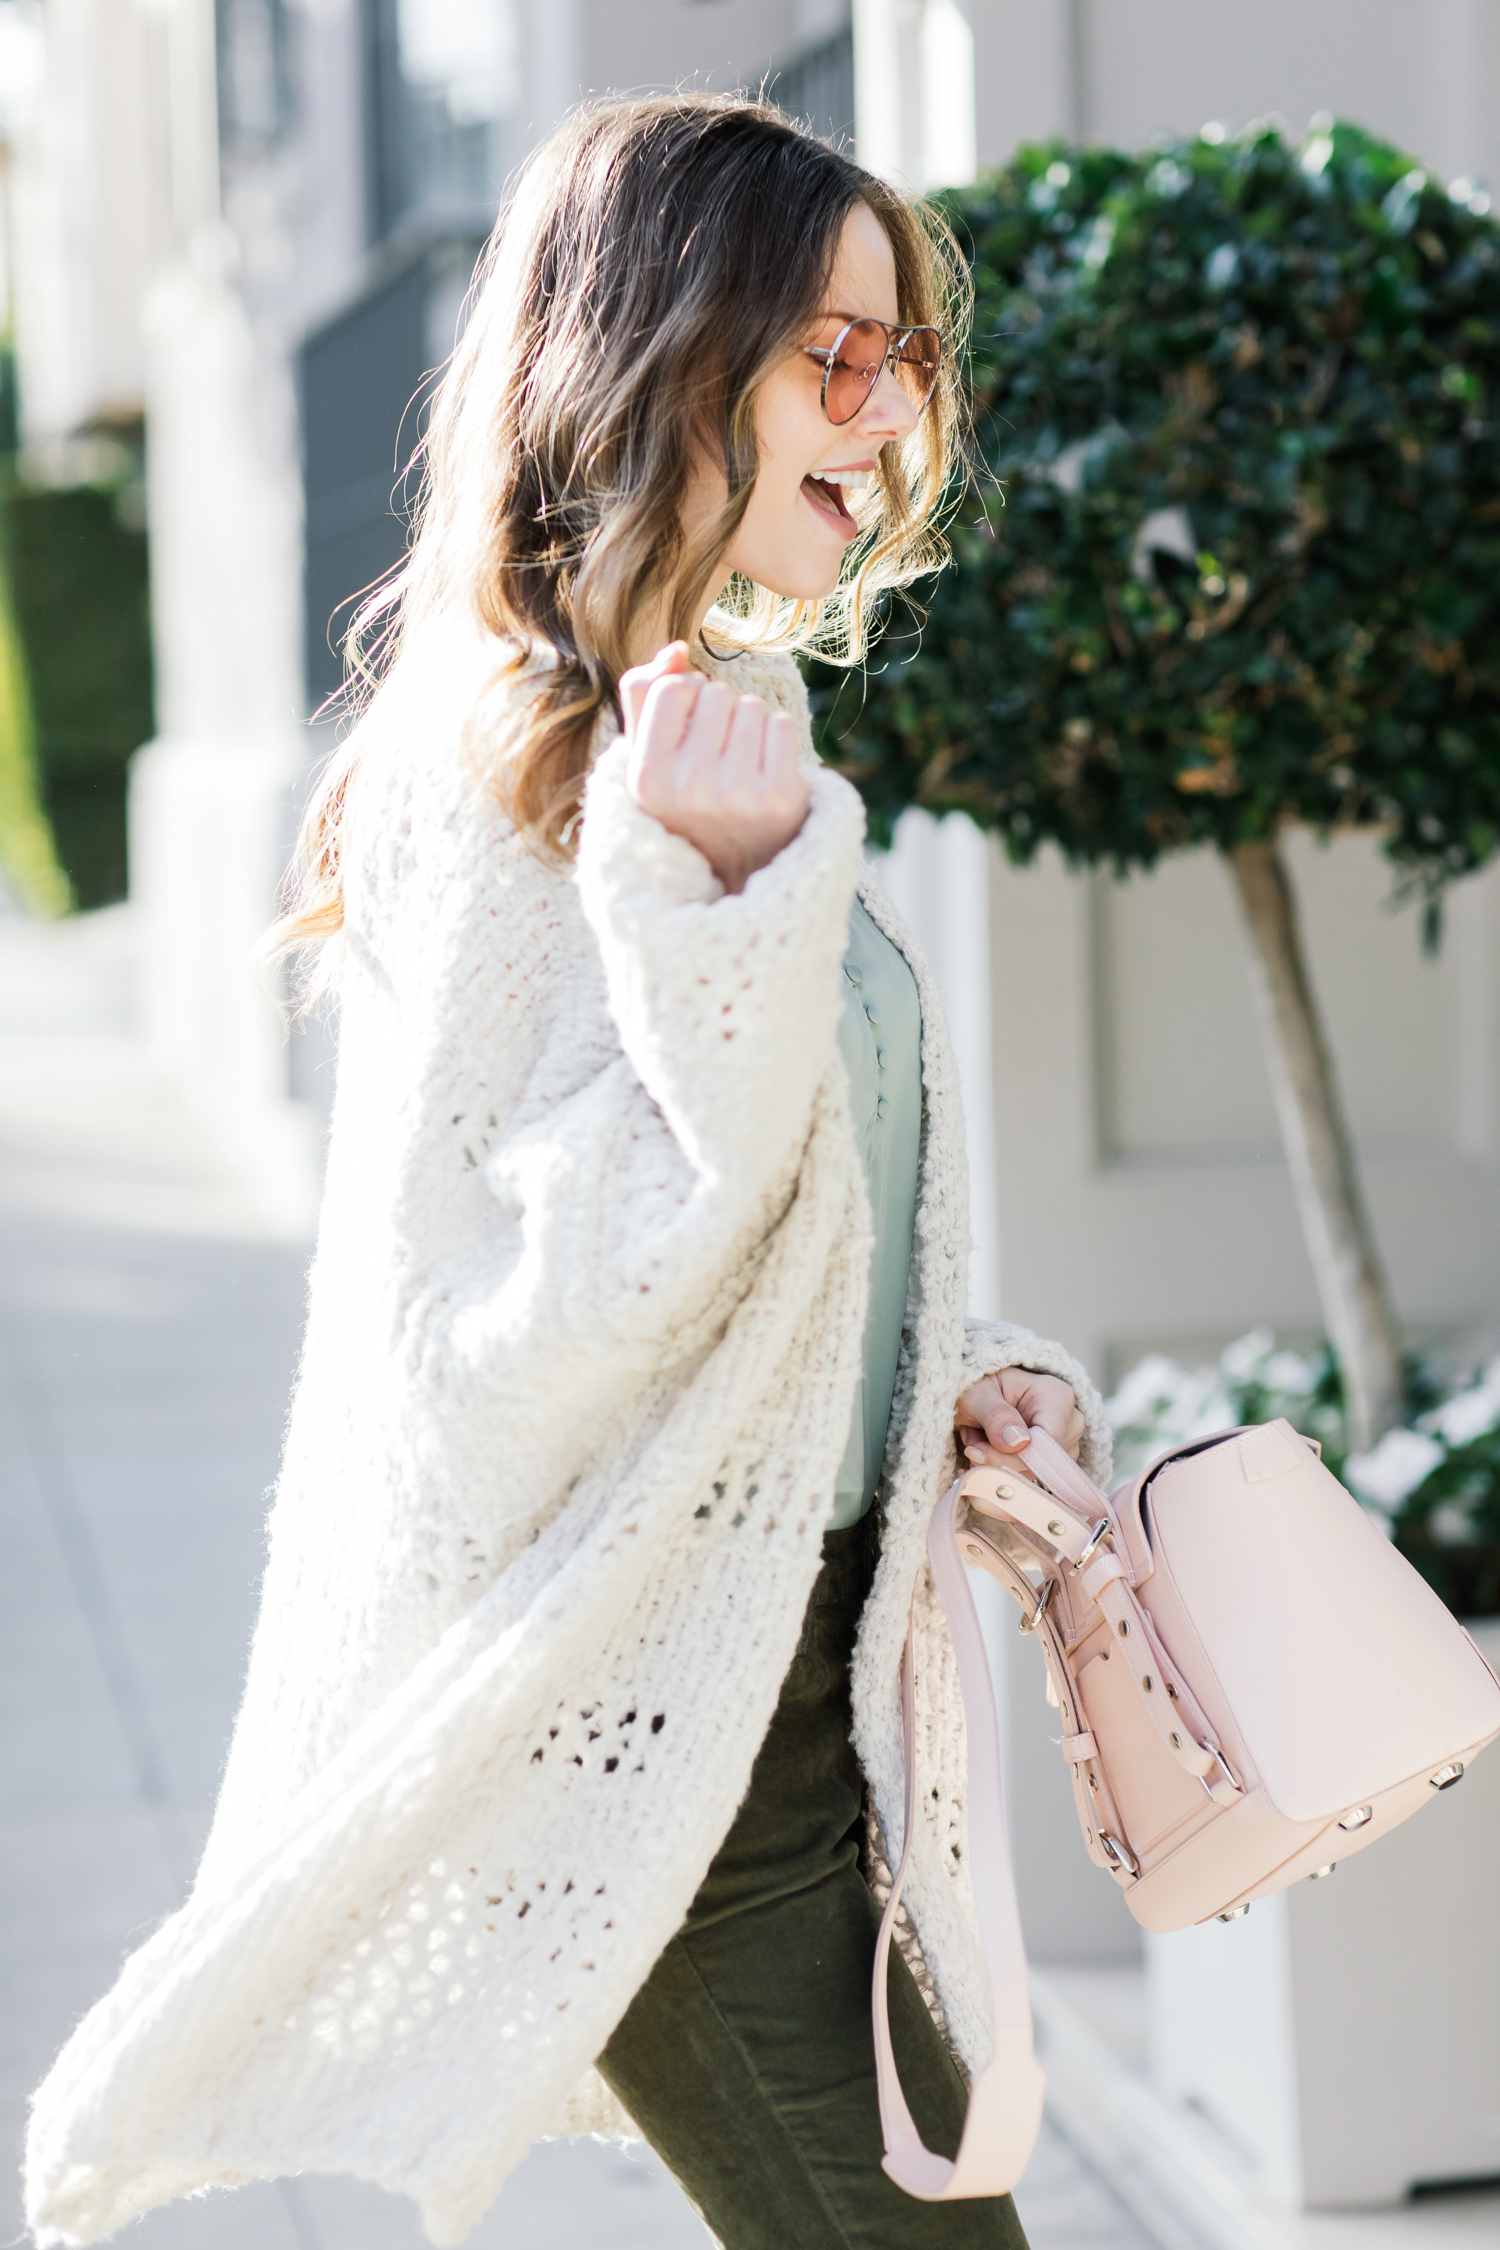 Alyssa Campanella of The A List blog wearing Free People Saturday Morning comfy sweater and Current Elliott Stiletto jeans